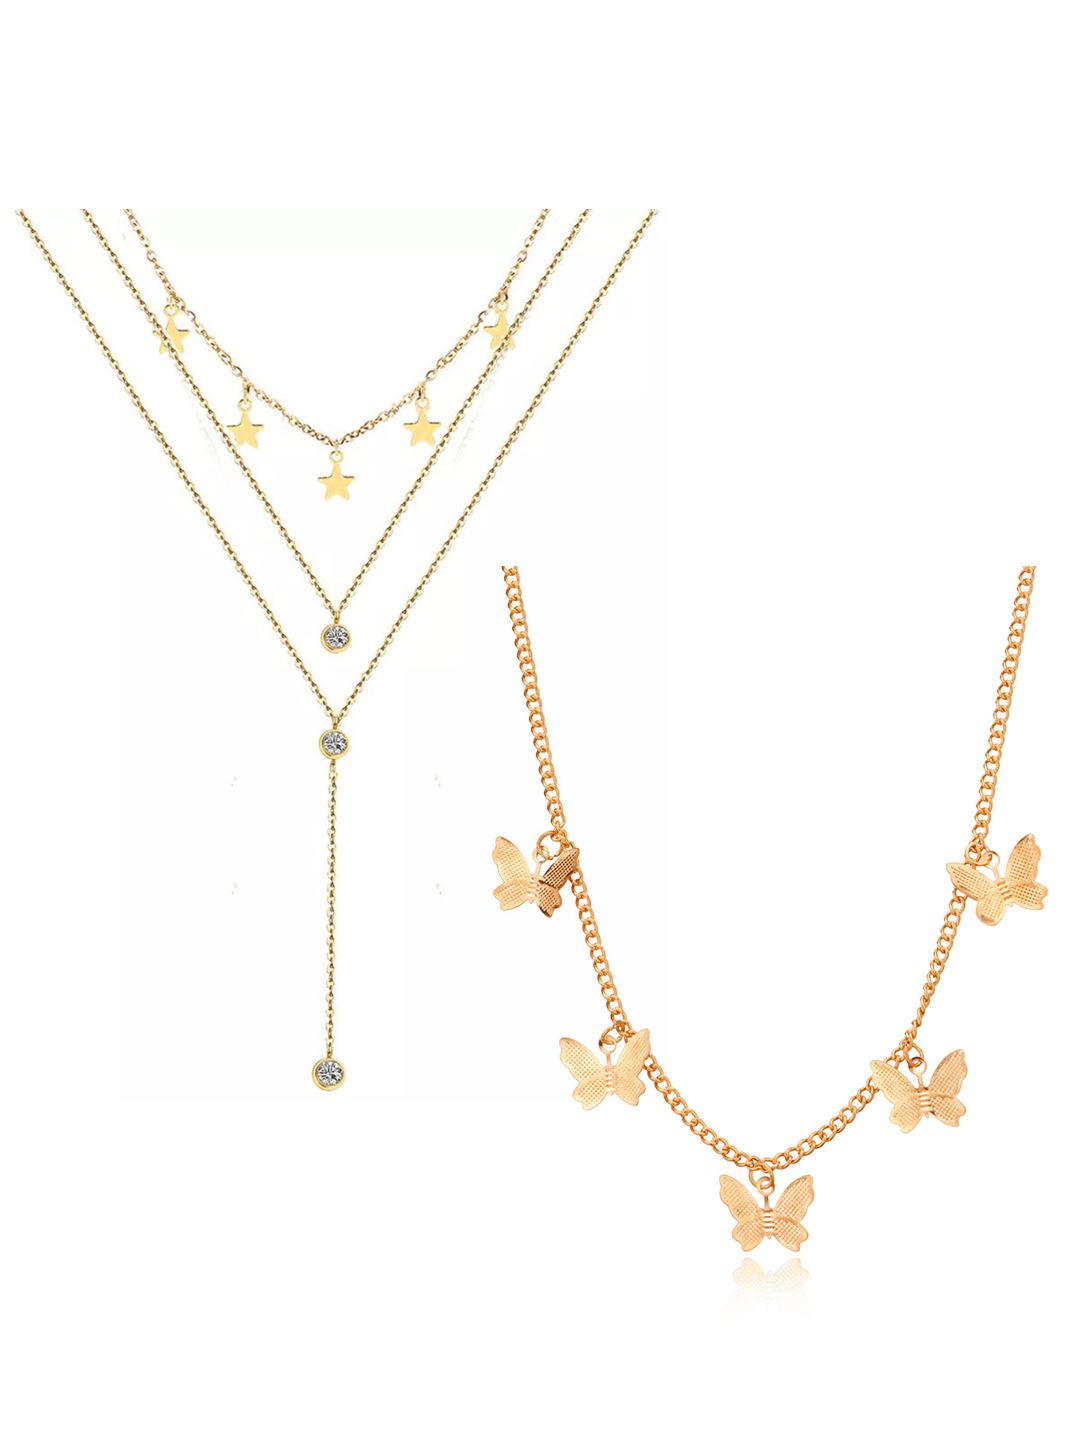 Vembley Set of 2 Gold-Plated Layered Necklace Price in India